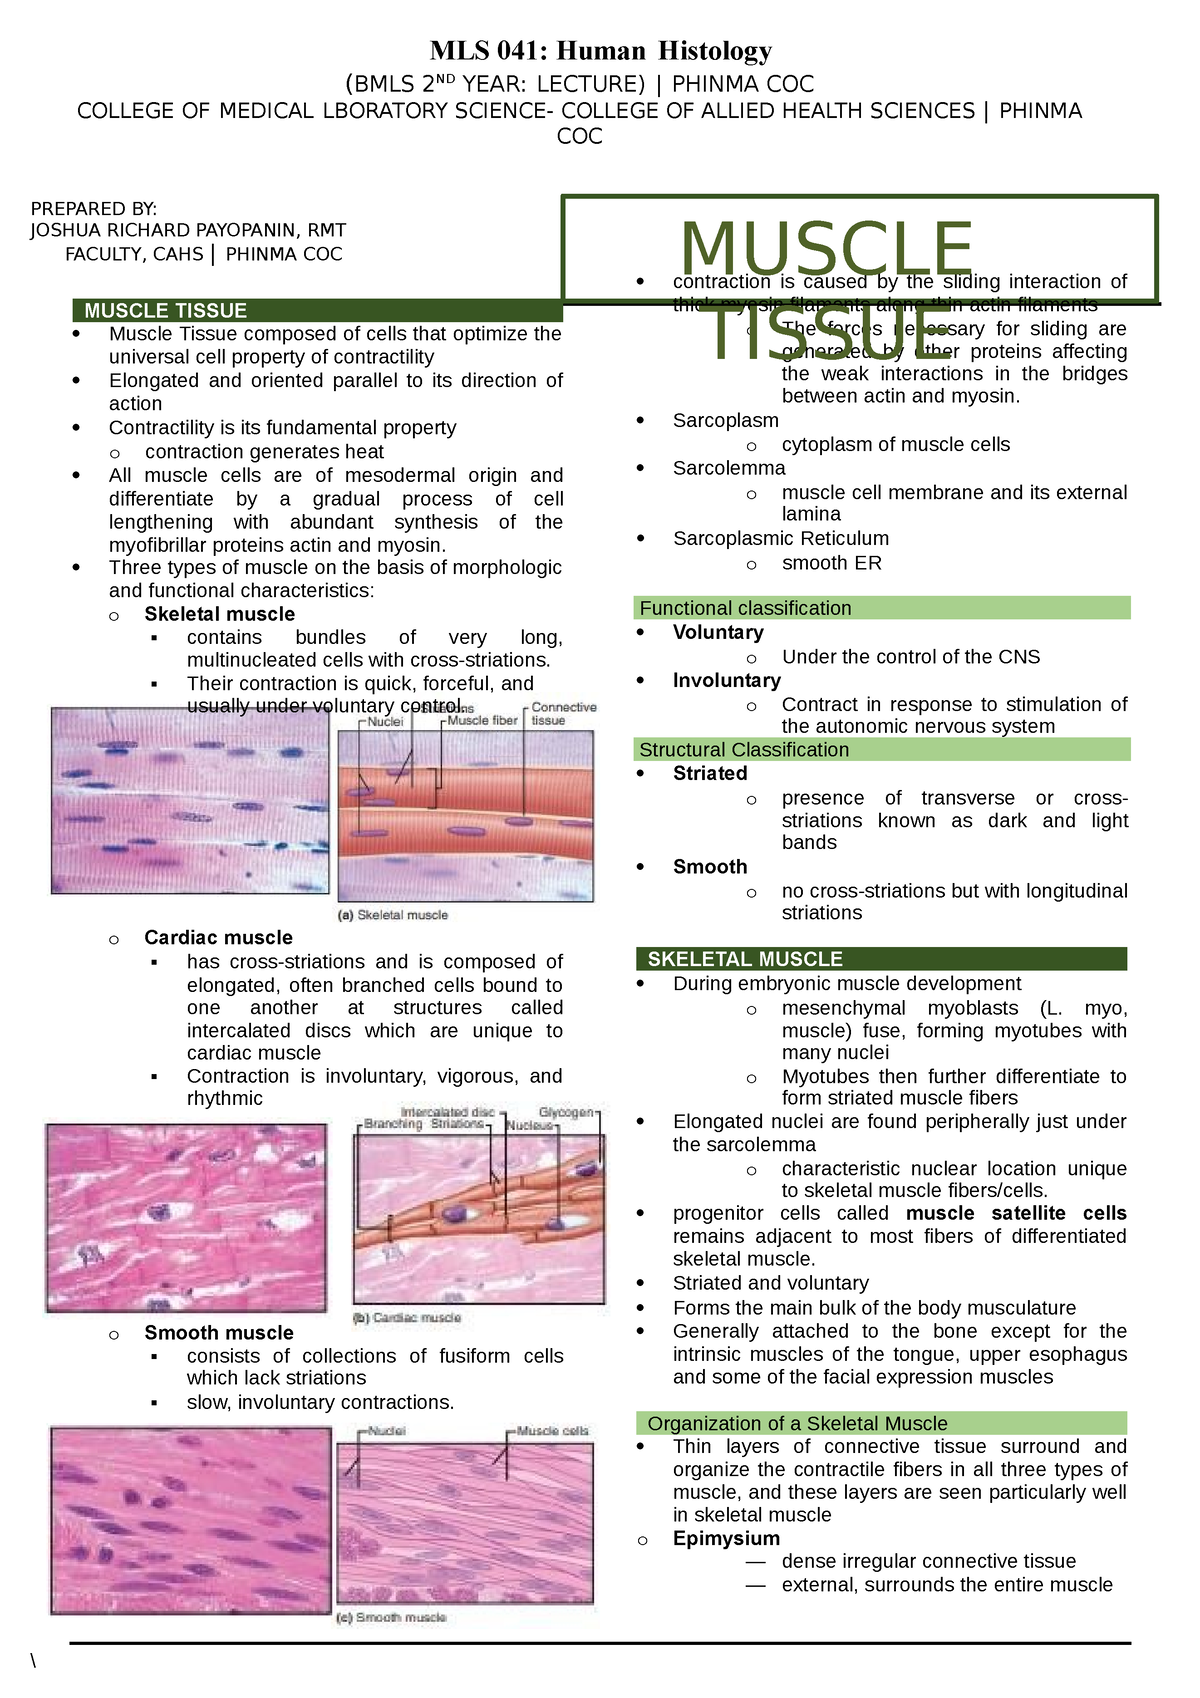 Lesson 5 - Muscle- Tissue - MLS 041: Human Histology (BMLS 2ND YEAR ...